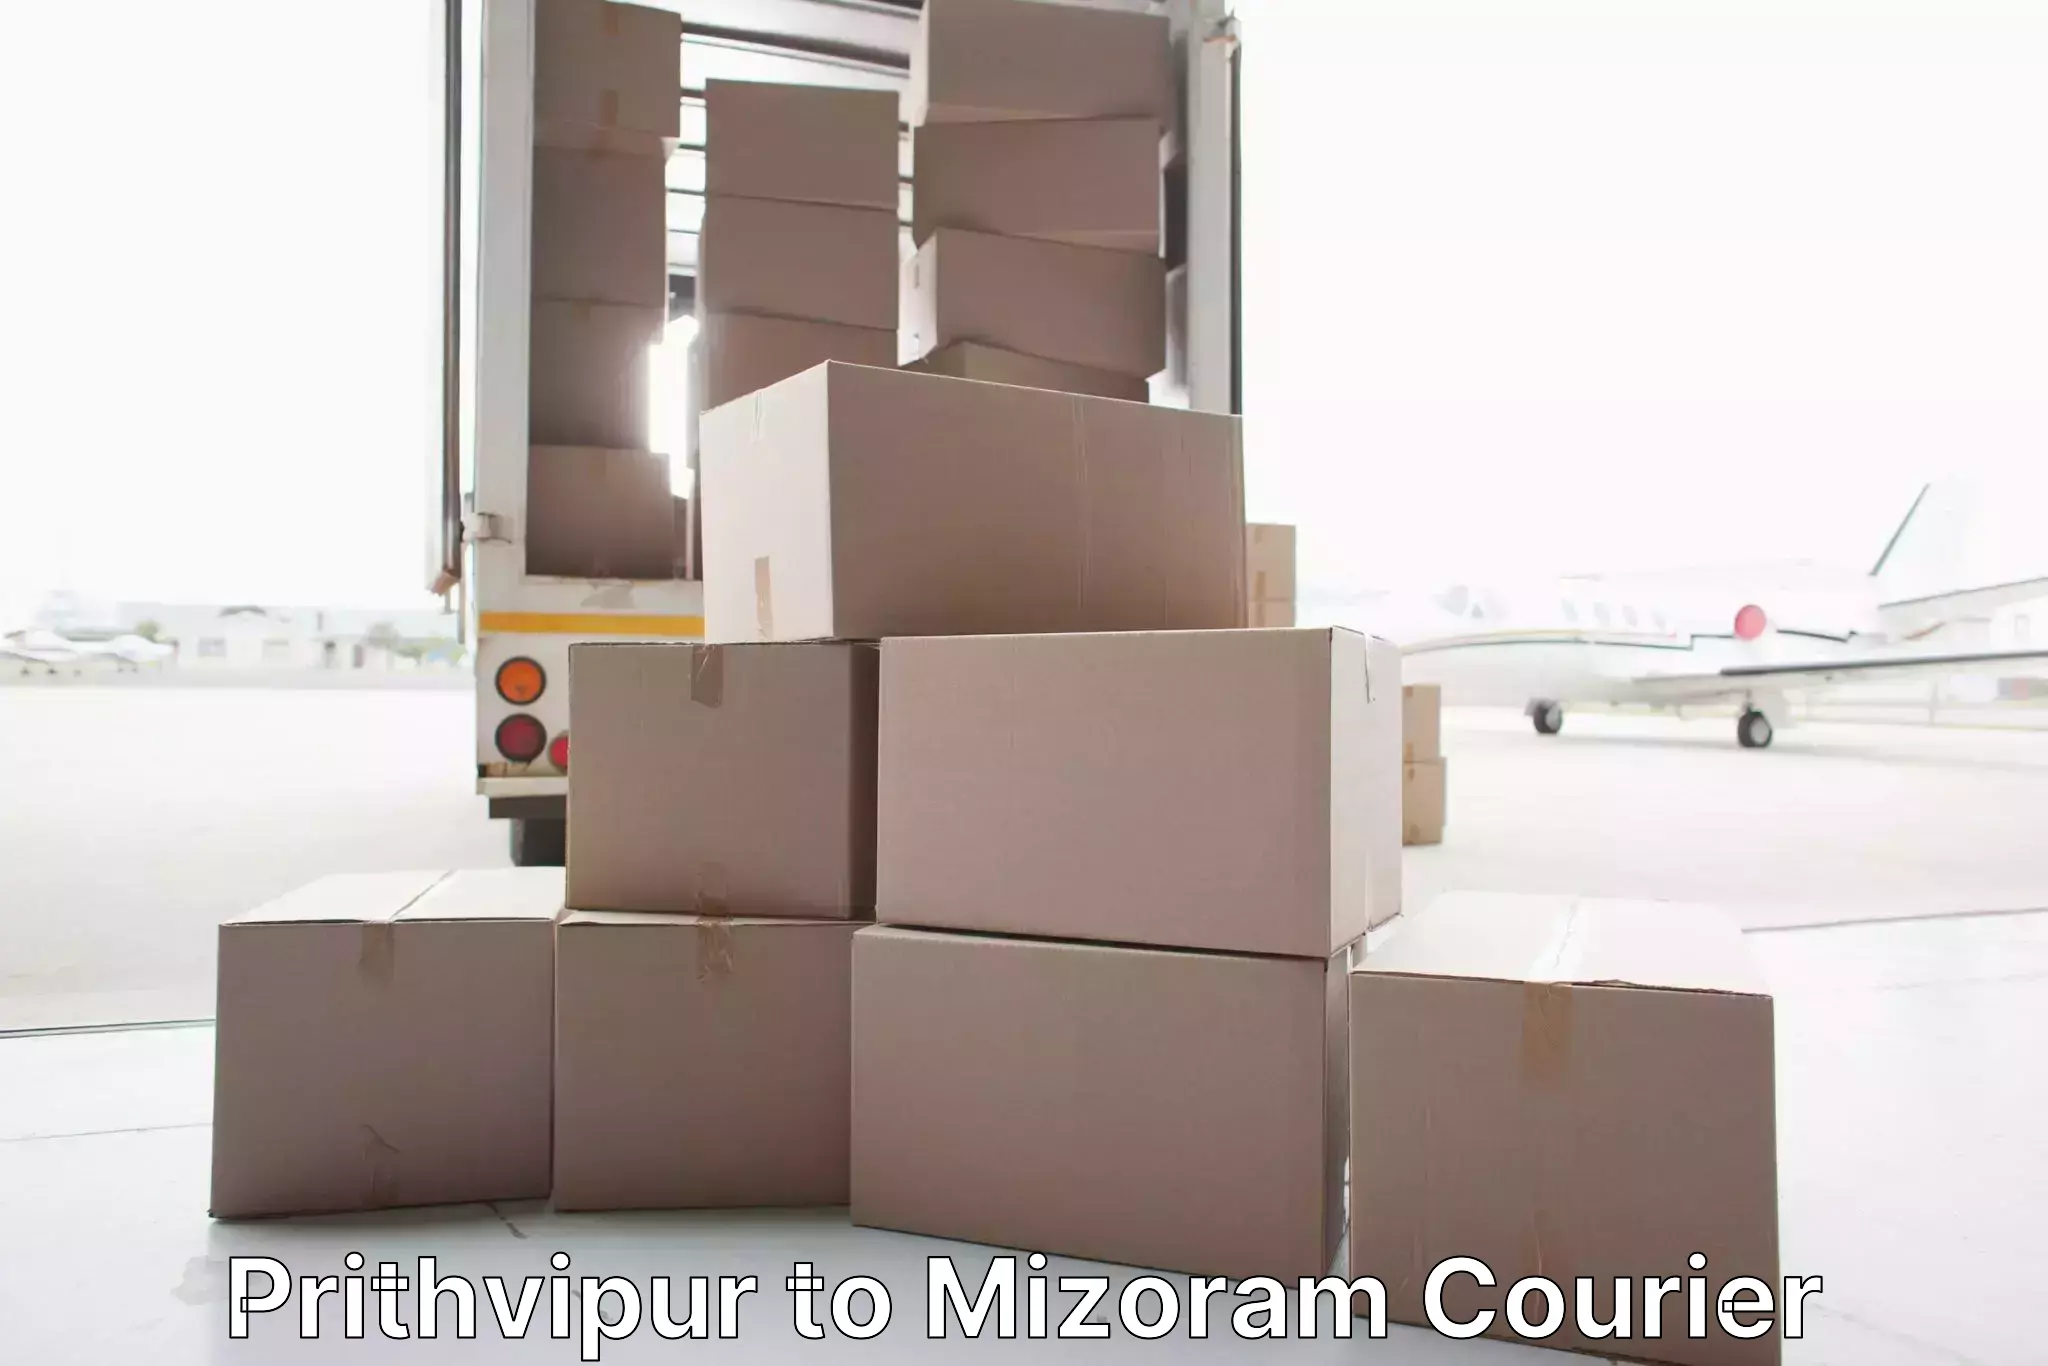 Specialized moving company Prithvipur to Aizawl